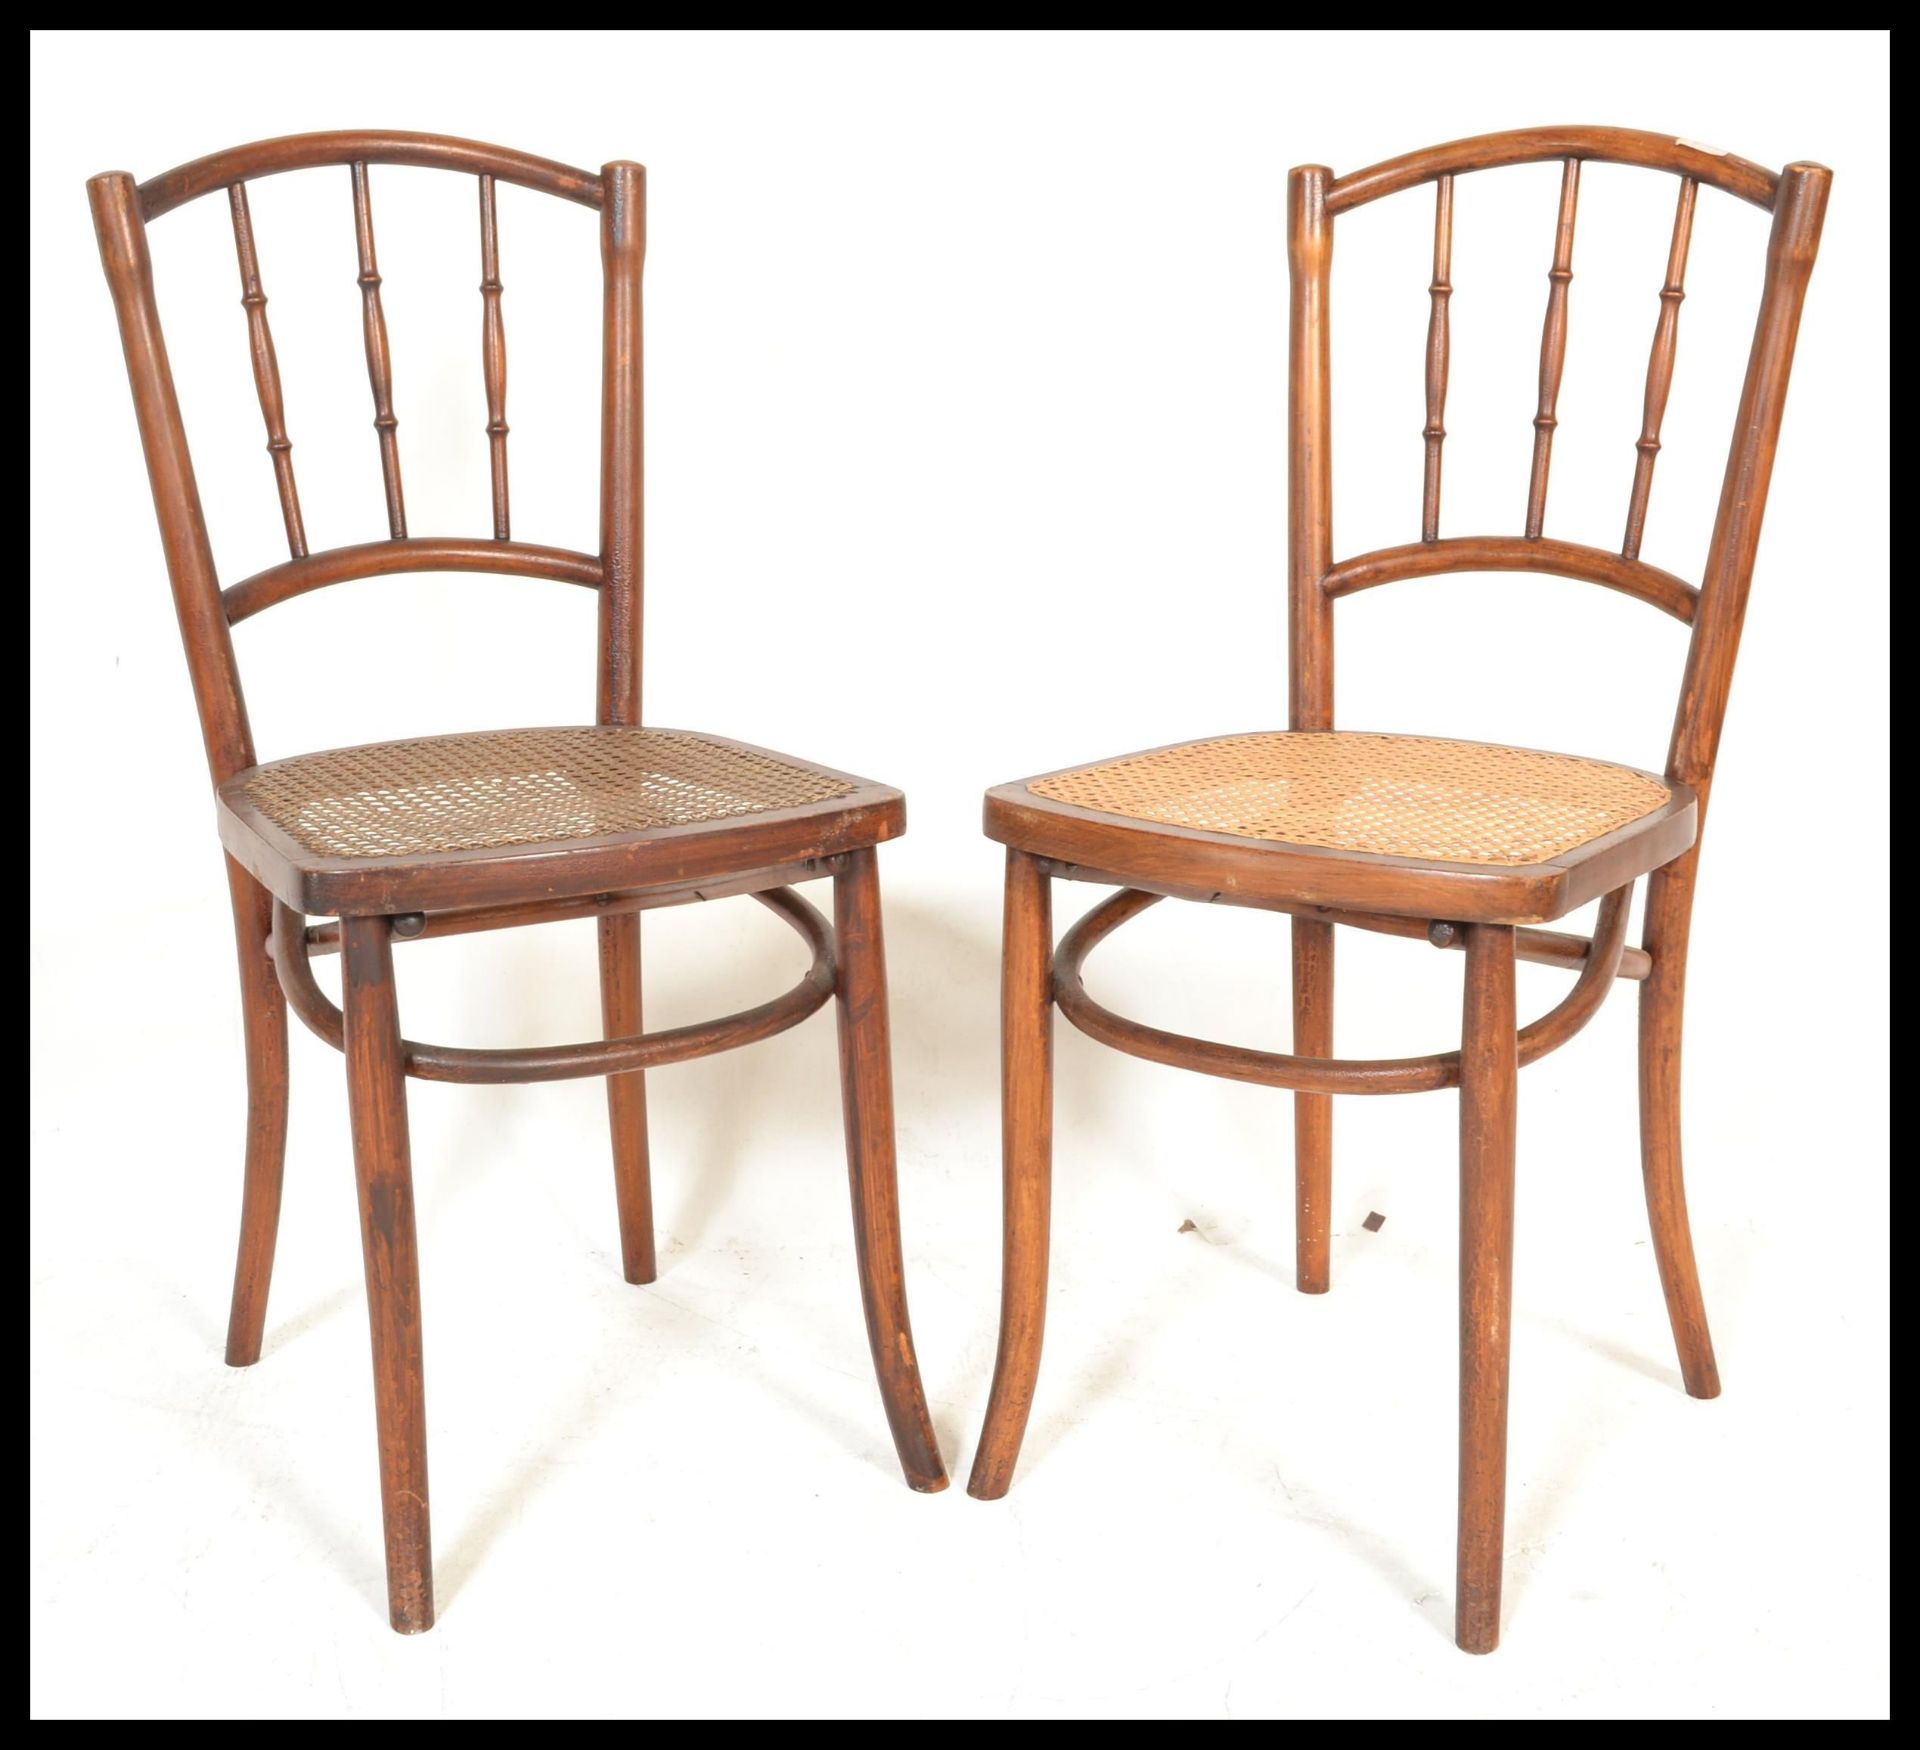 A pair of early 20th Century bentwood bedroom chairs in the manner of Thonet having bergere seats.